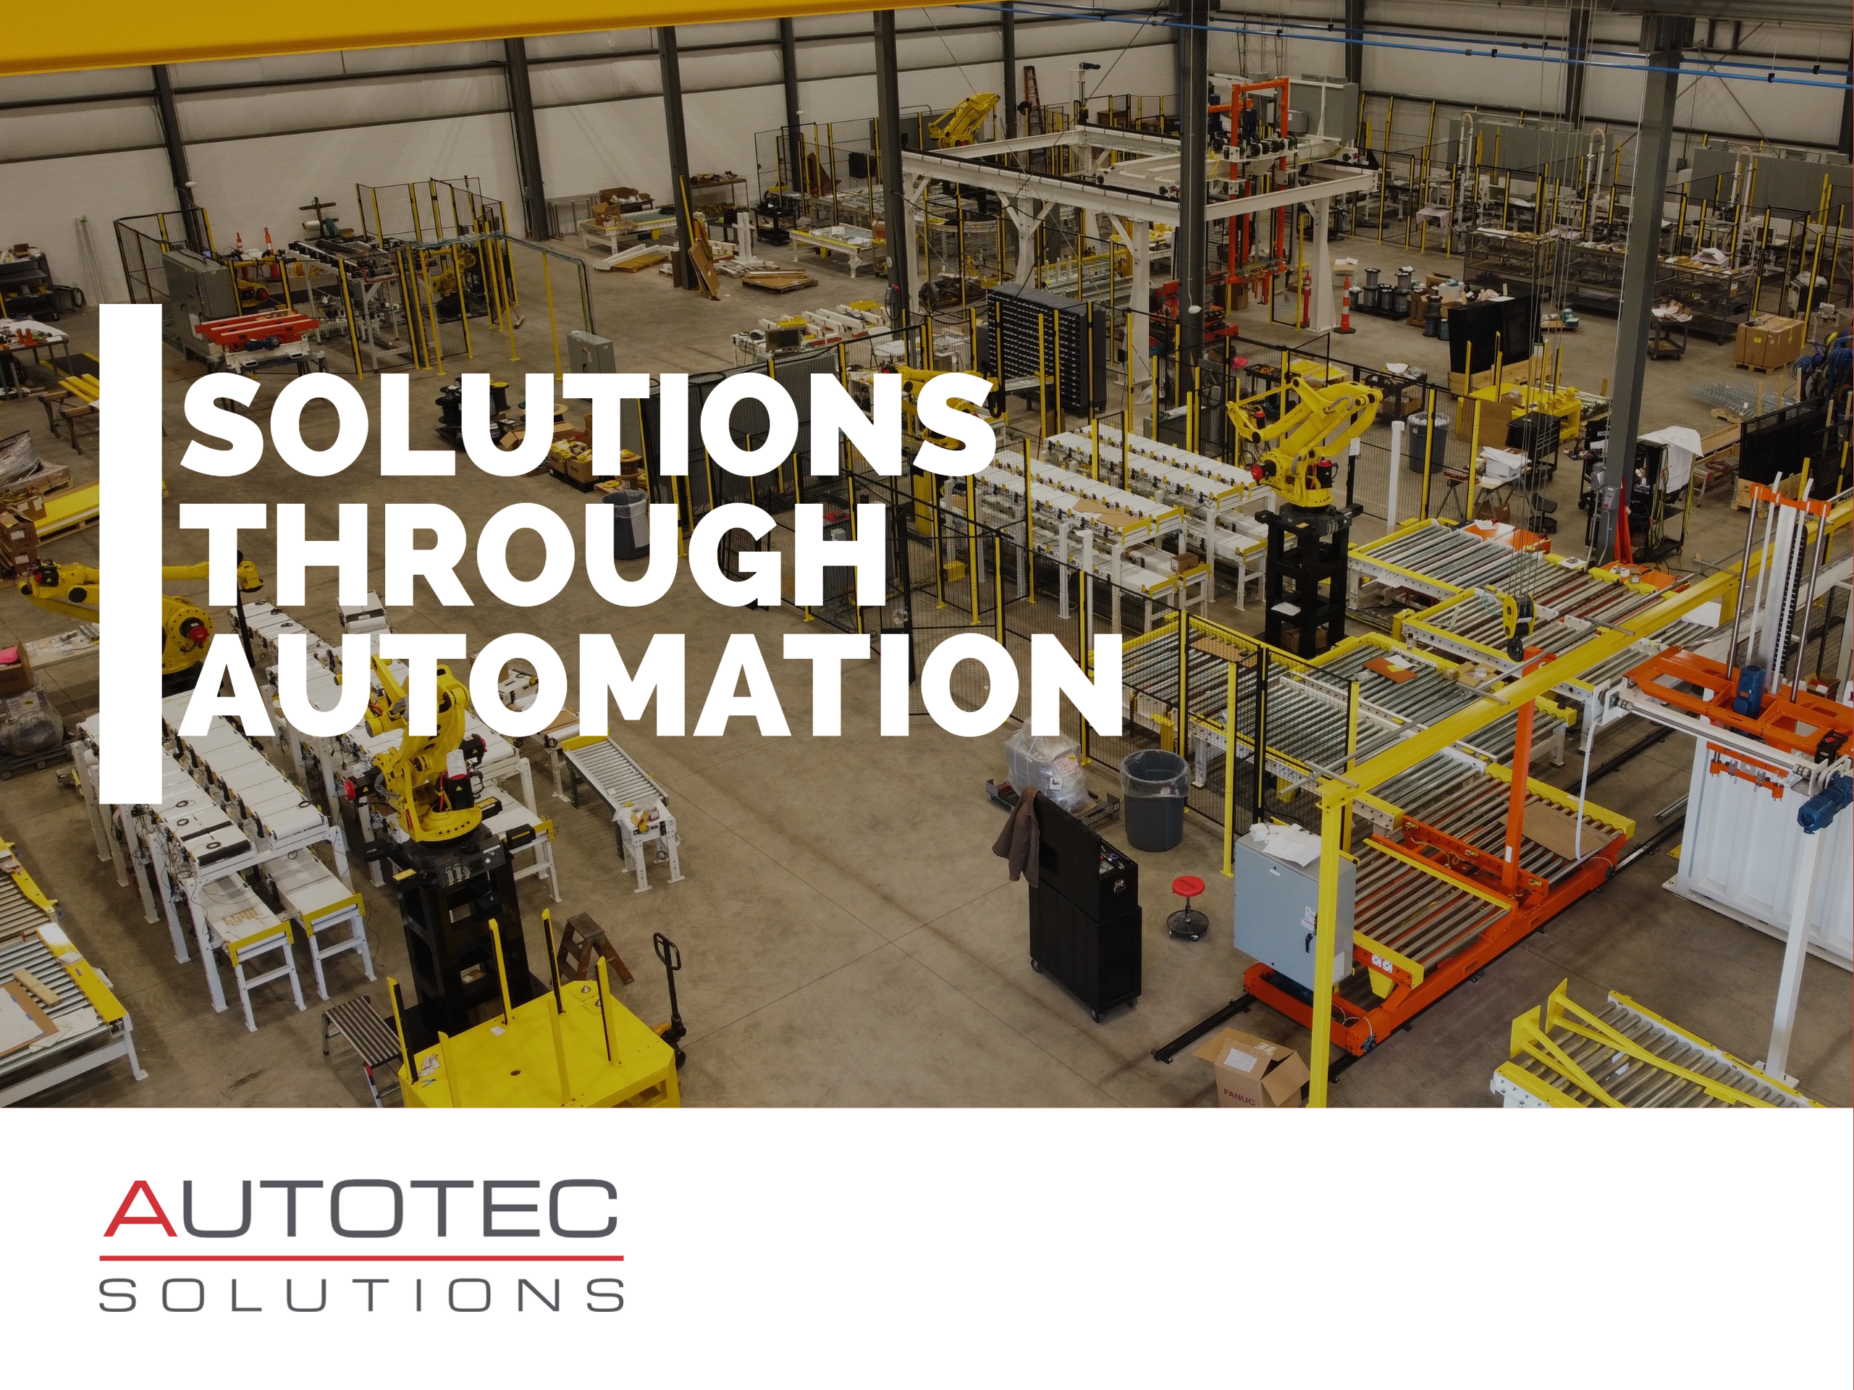 Overhead view of assembly area at Autotec Solutions in Toledo, Ohio